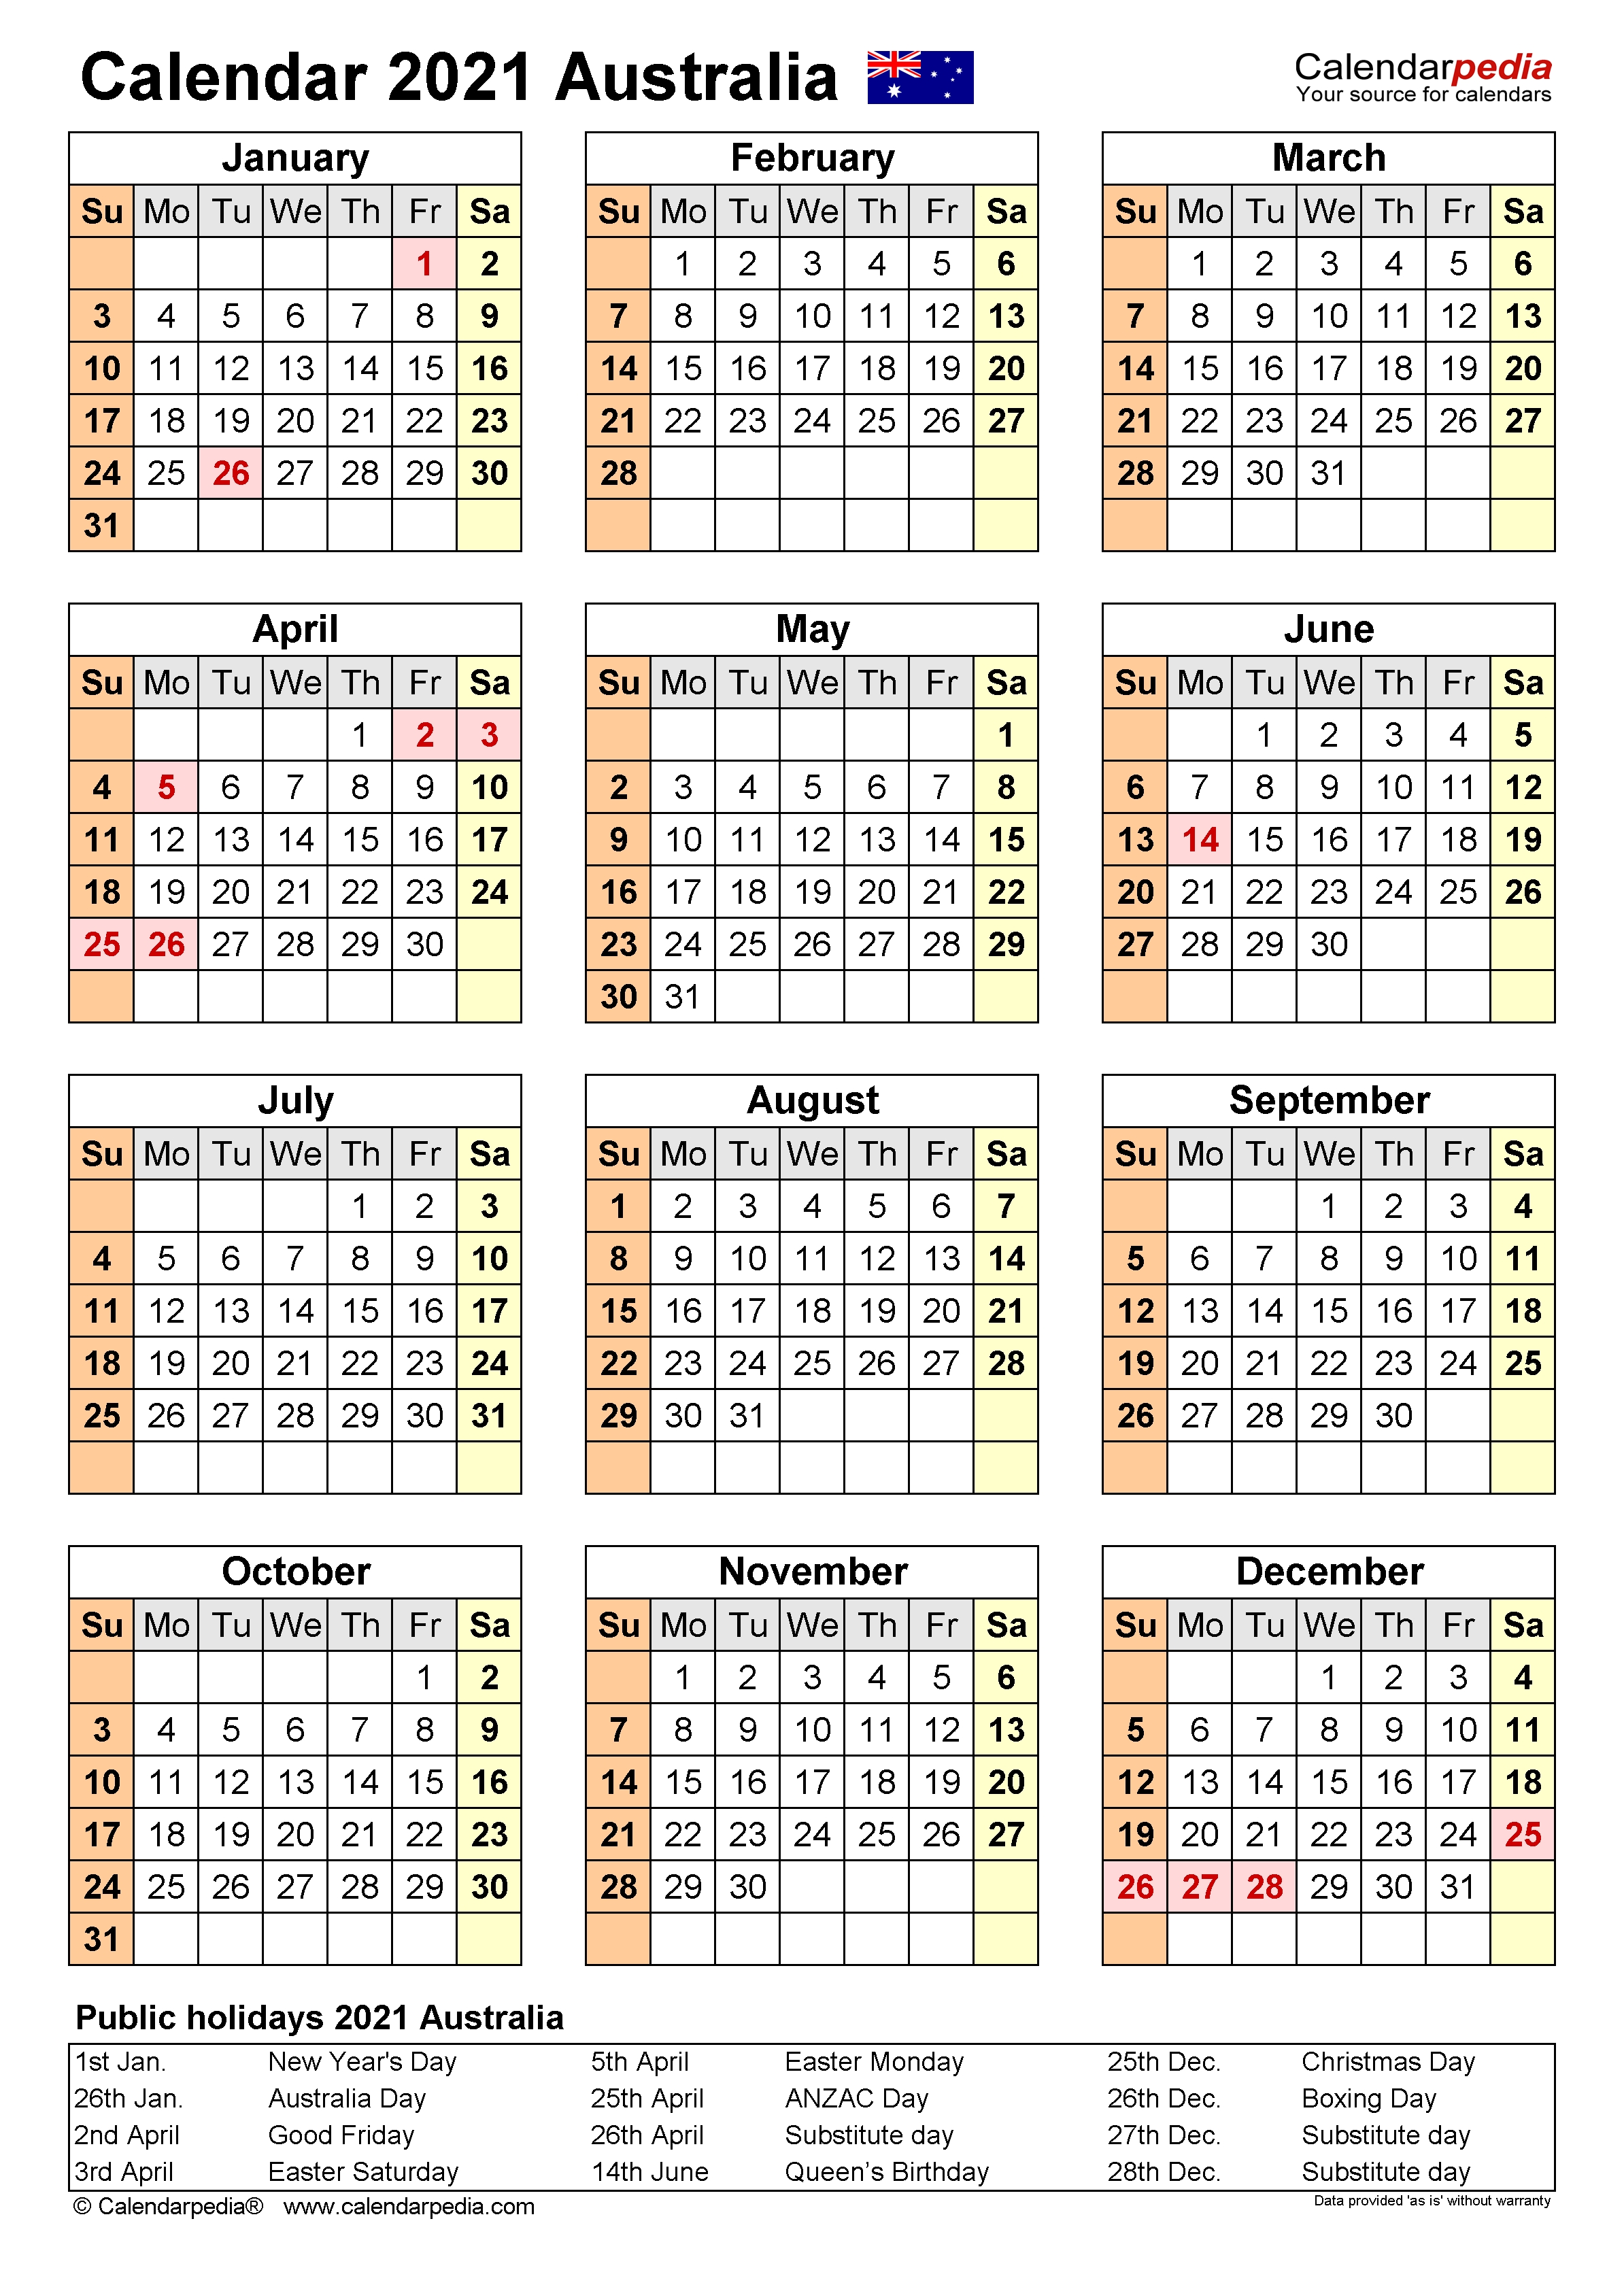 Australia Calendar 2021 - Free Printable Excel Templates  What Australian Financial Year Are We In Currently